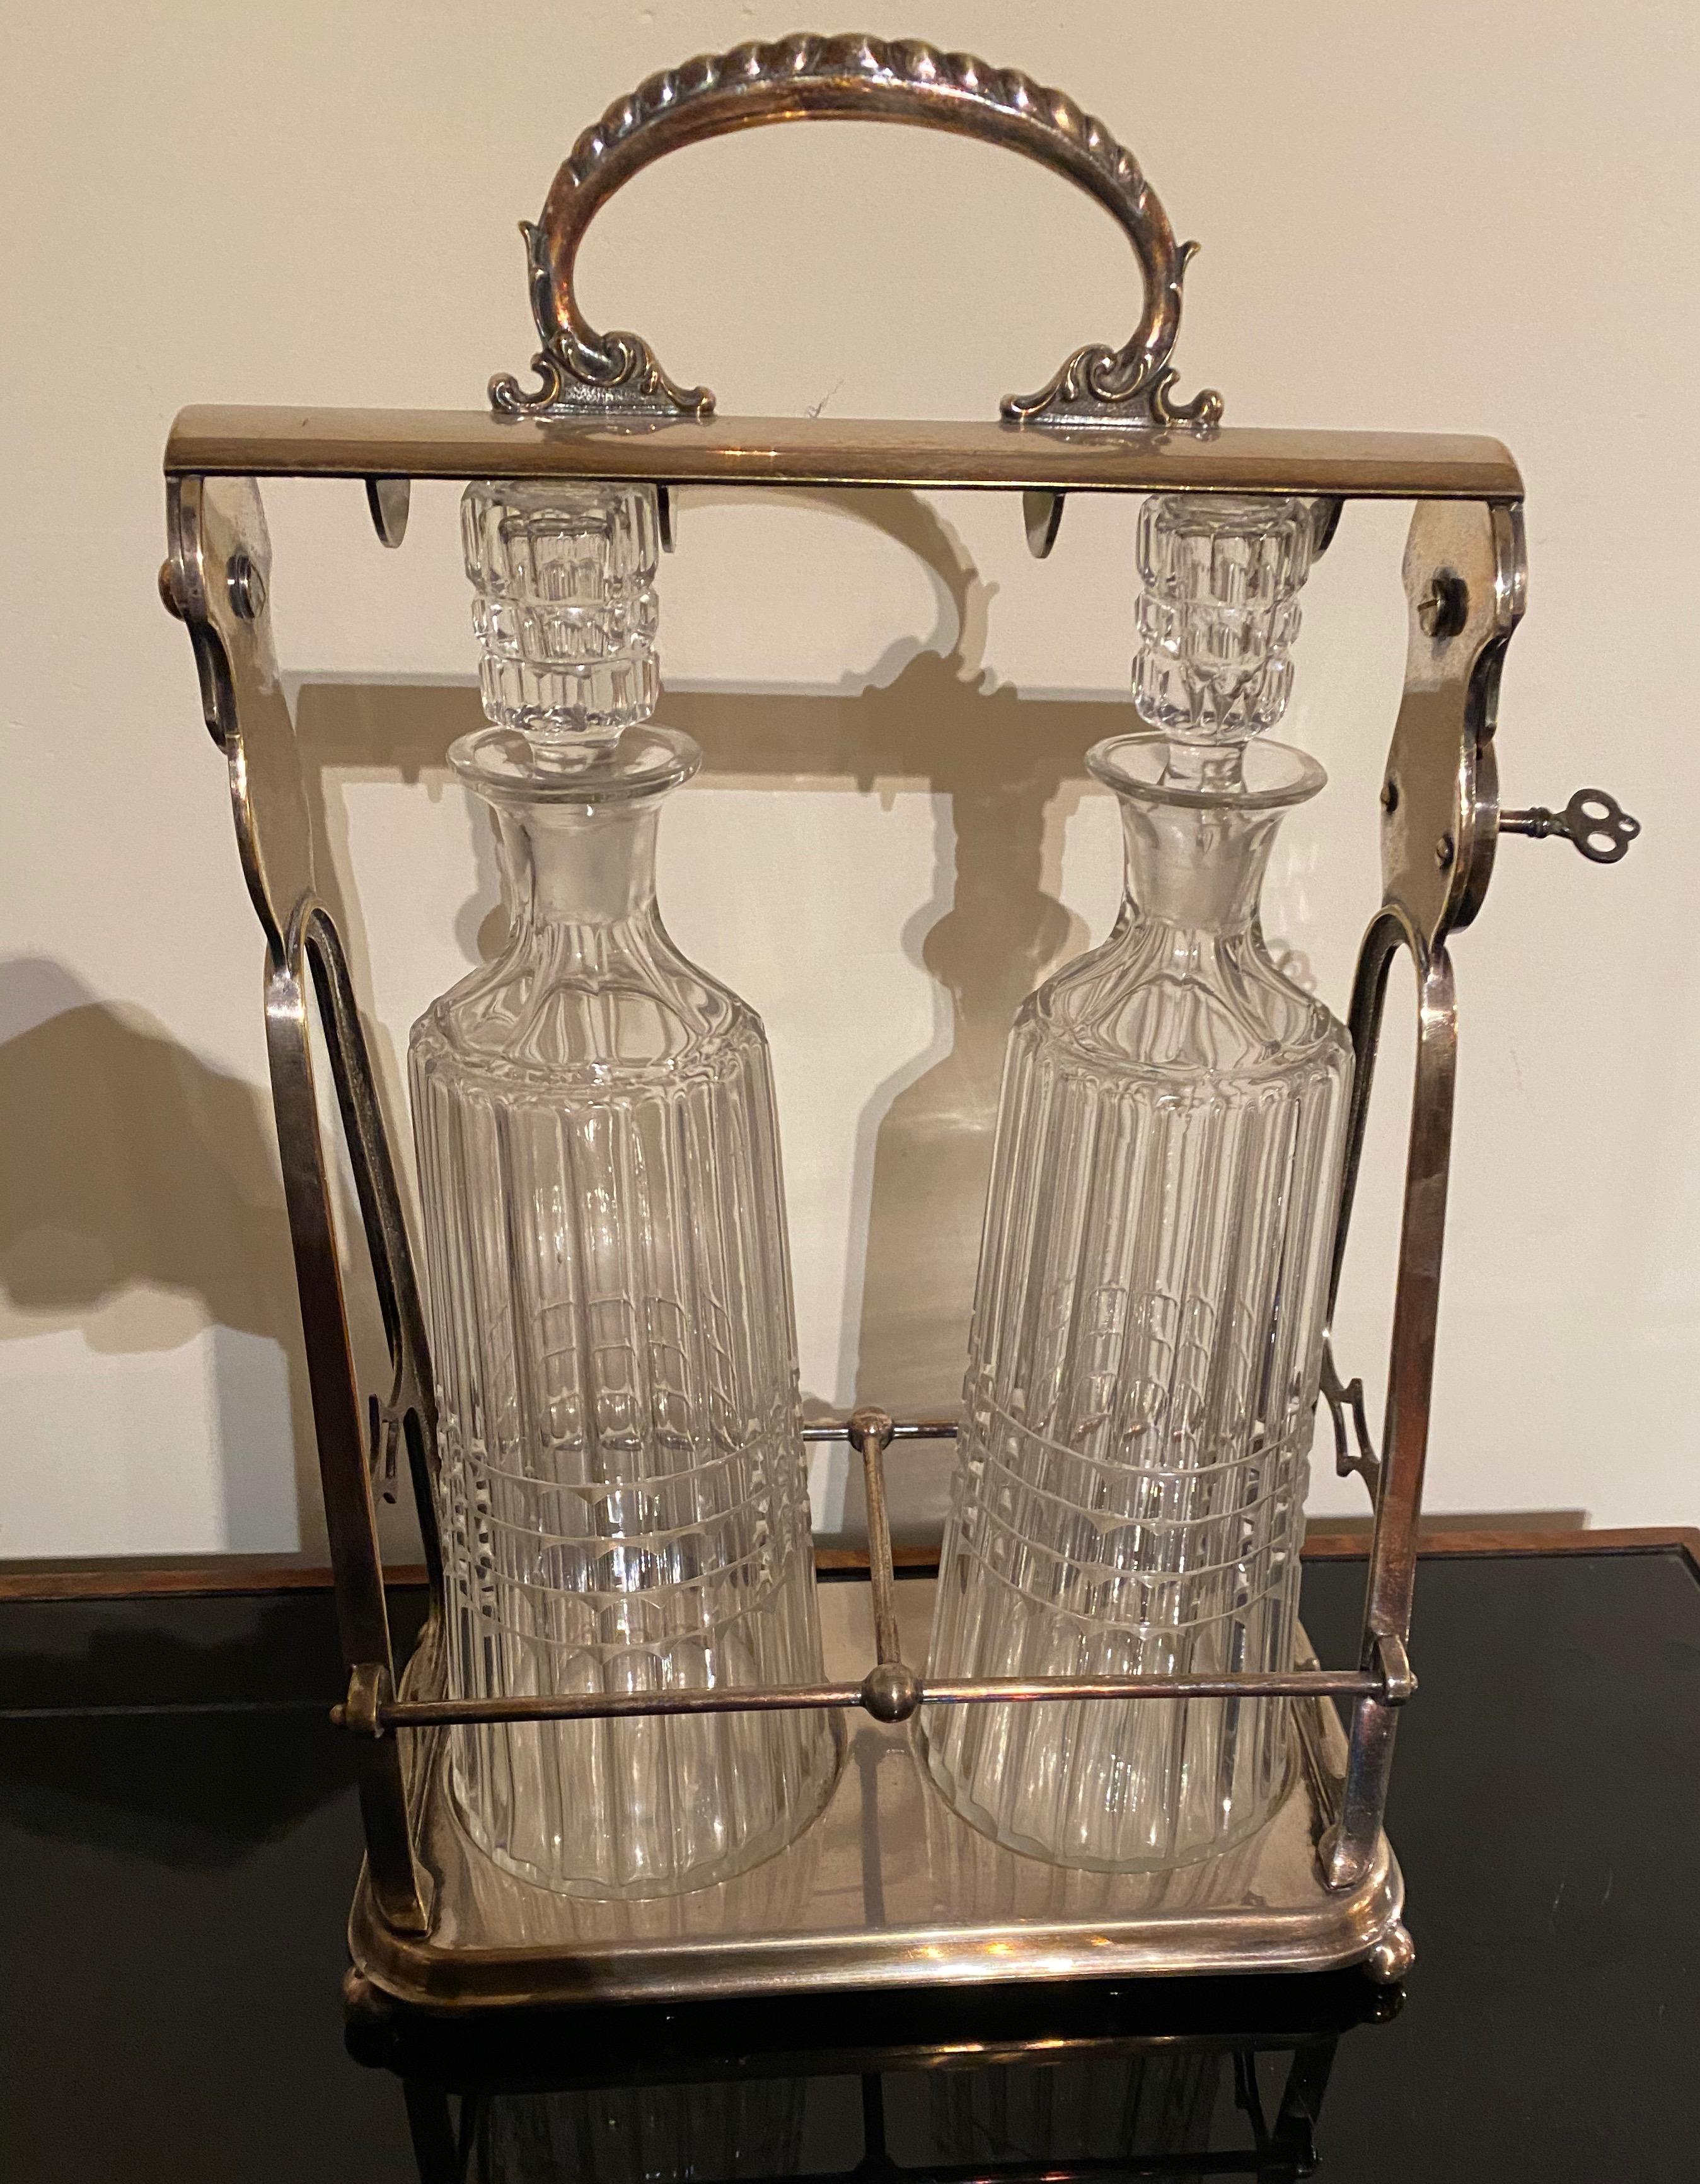 A silver locking tantalus with ribbed crystal decanters to display and serve fine liquors. This uniquely designed piece holds two separate bottles and opens to show them off. Faceted crystal knobs top, each bottle is nestled in a shaped silverplate